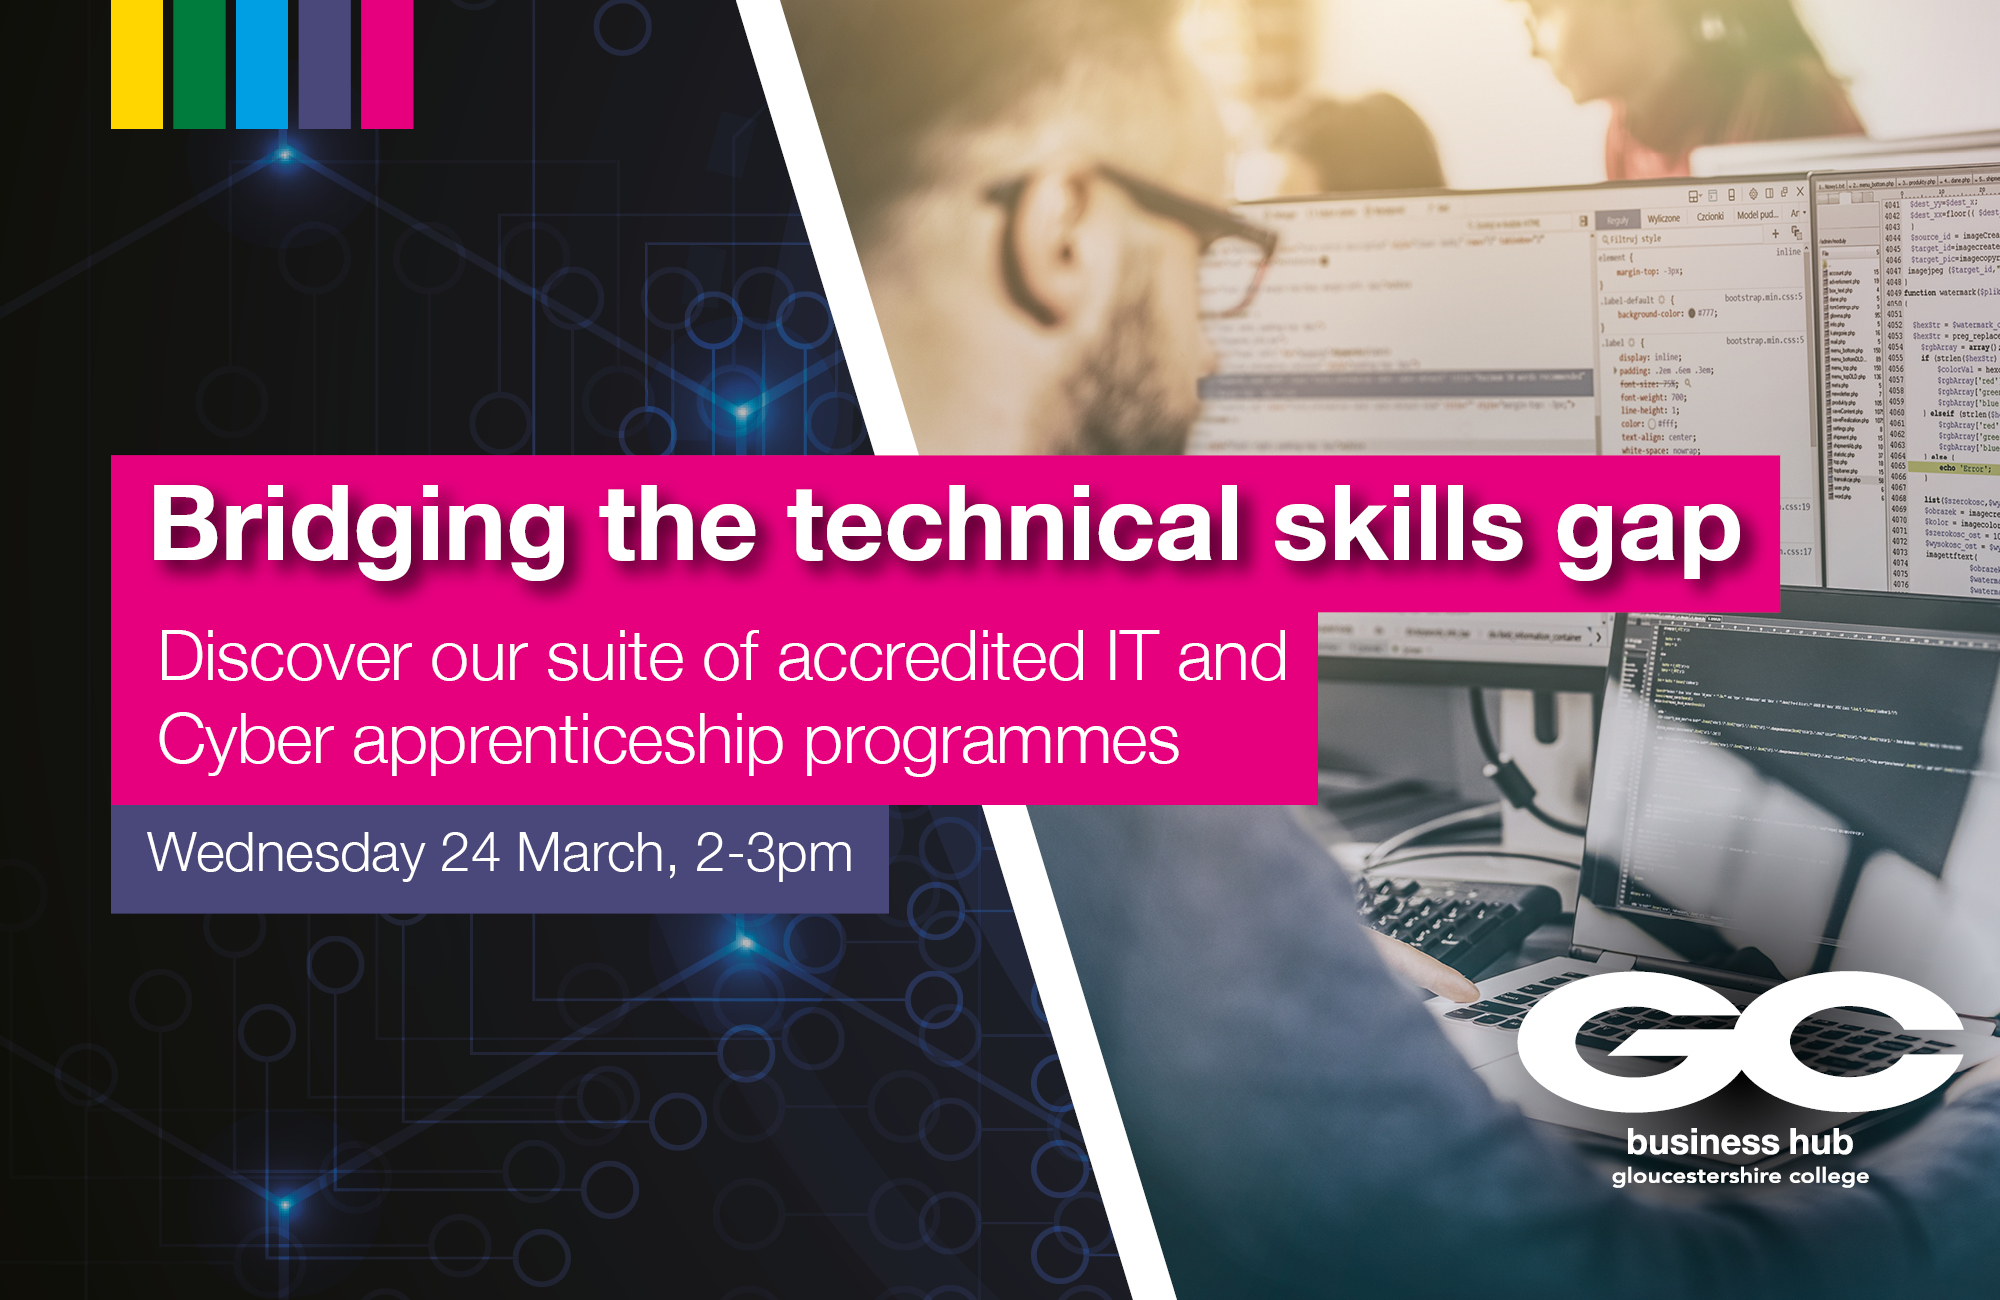 Bridging the technical skills gap: discover IT and cyber apprenticeships